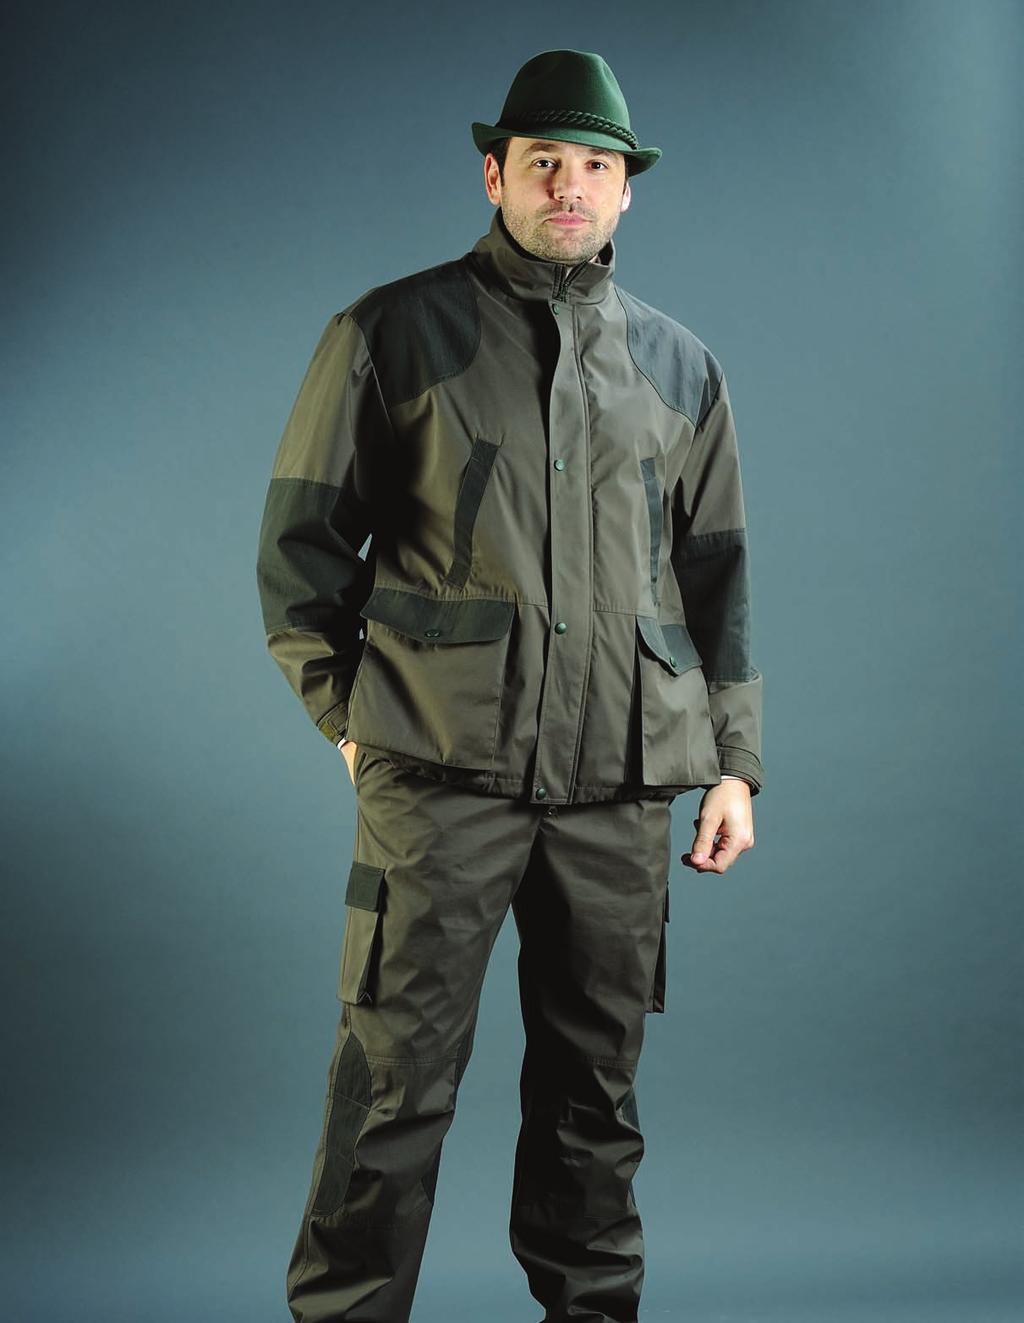 8 JACKET CODE 10-2301 Functional pockets with flaps closed with buttons